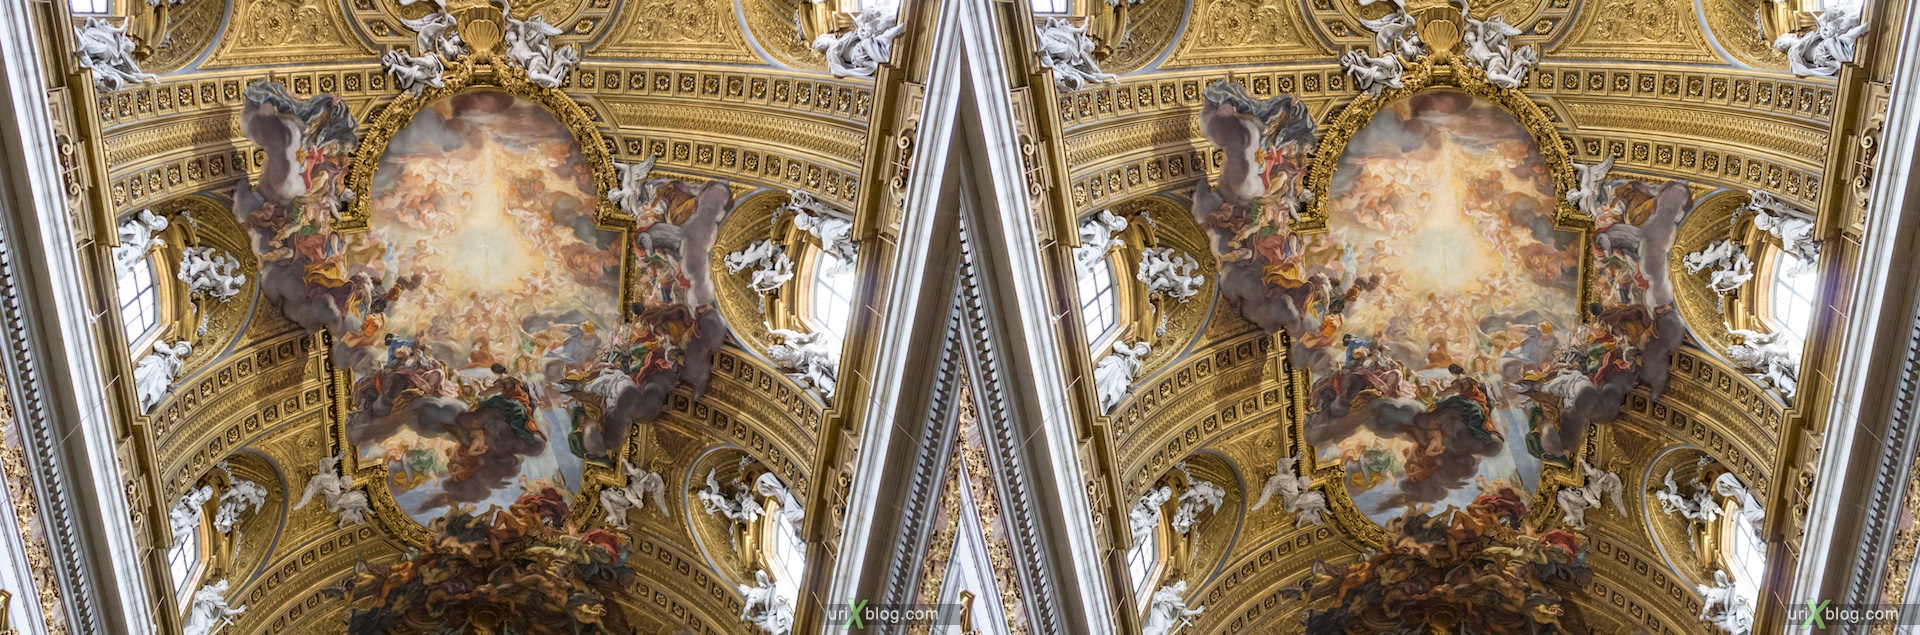 2012, church of the Gesù, Rome, Italy, cathedral, monastery, Christianity, Catholicism, 3D, stereo pair, cross-eyed, crossview, cross view stereo pair